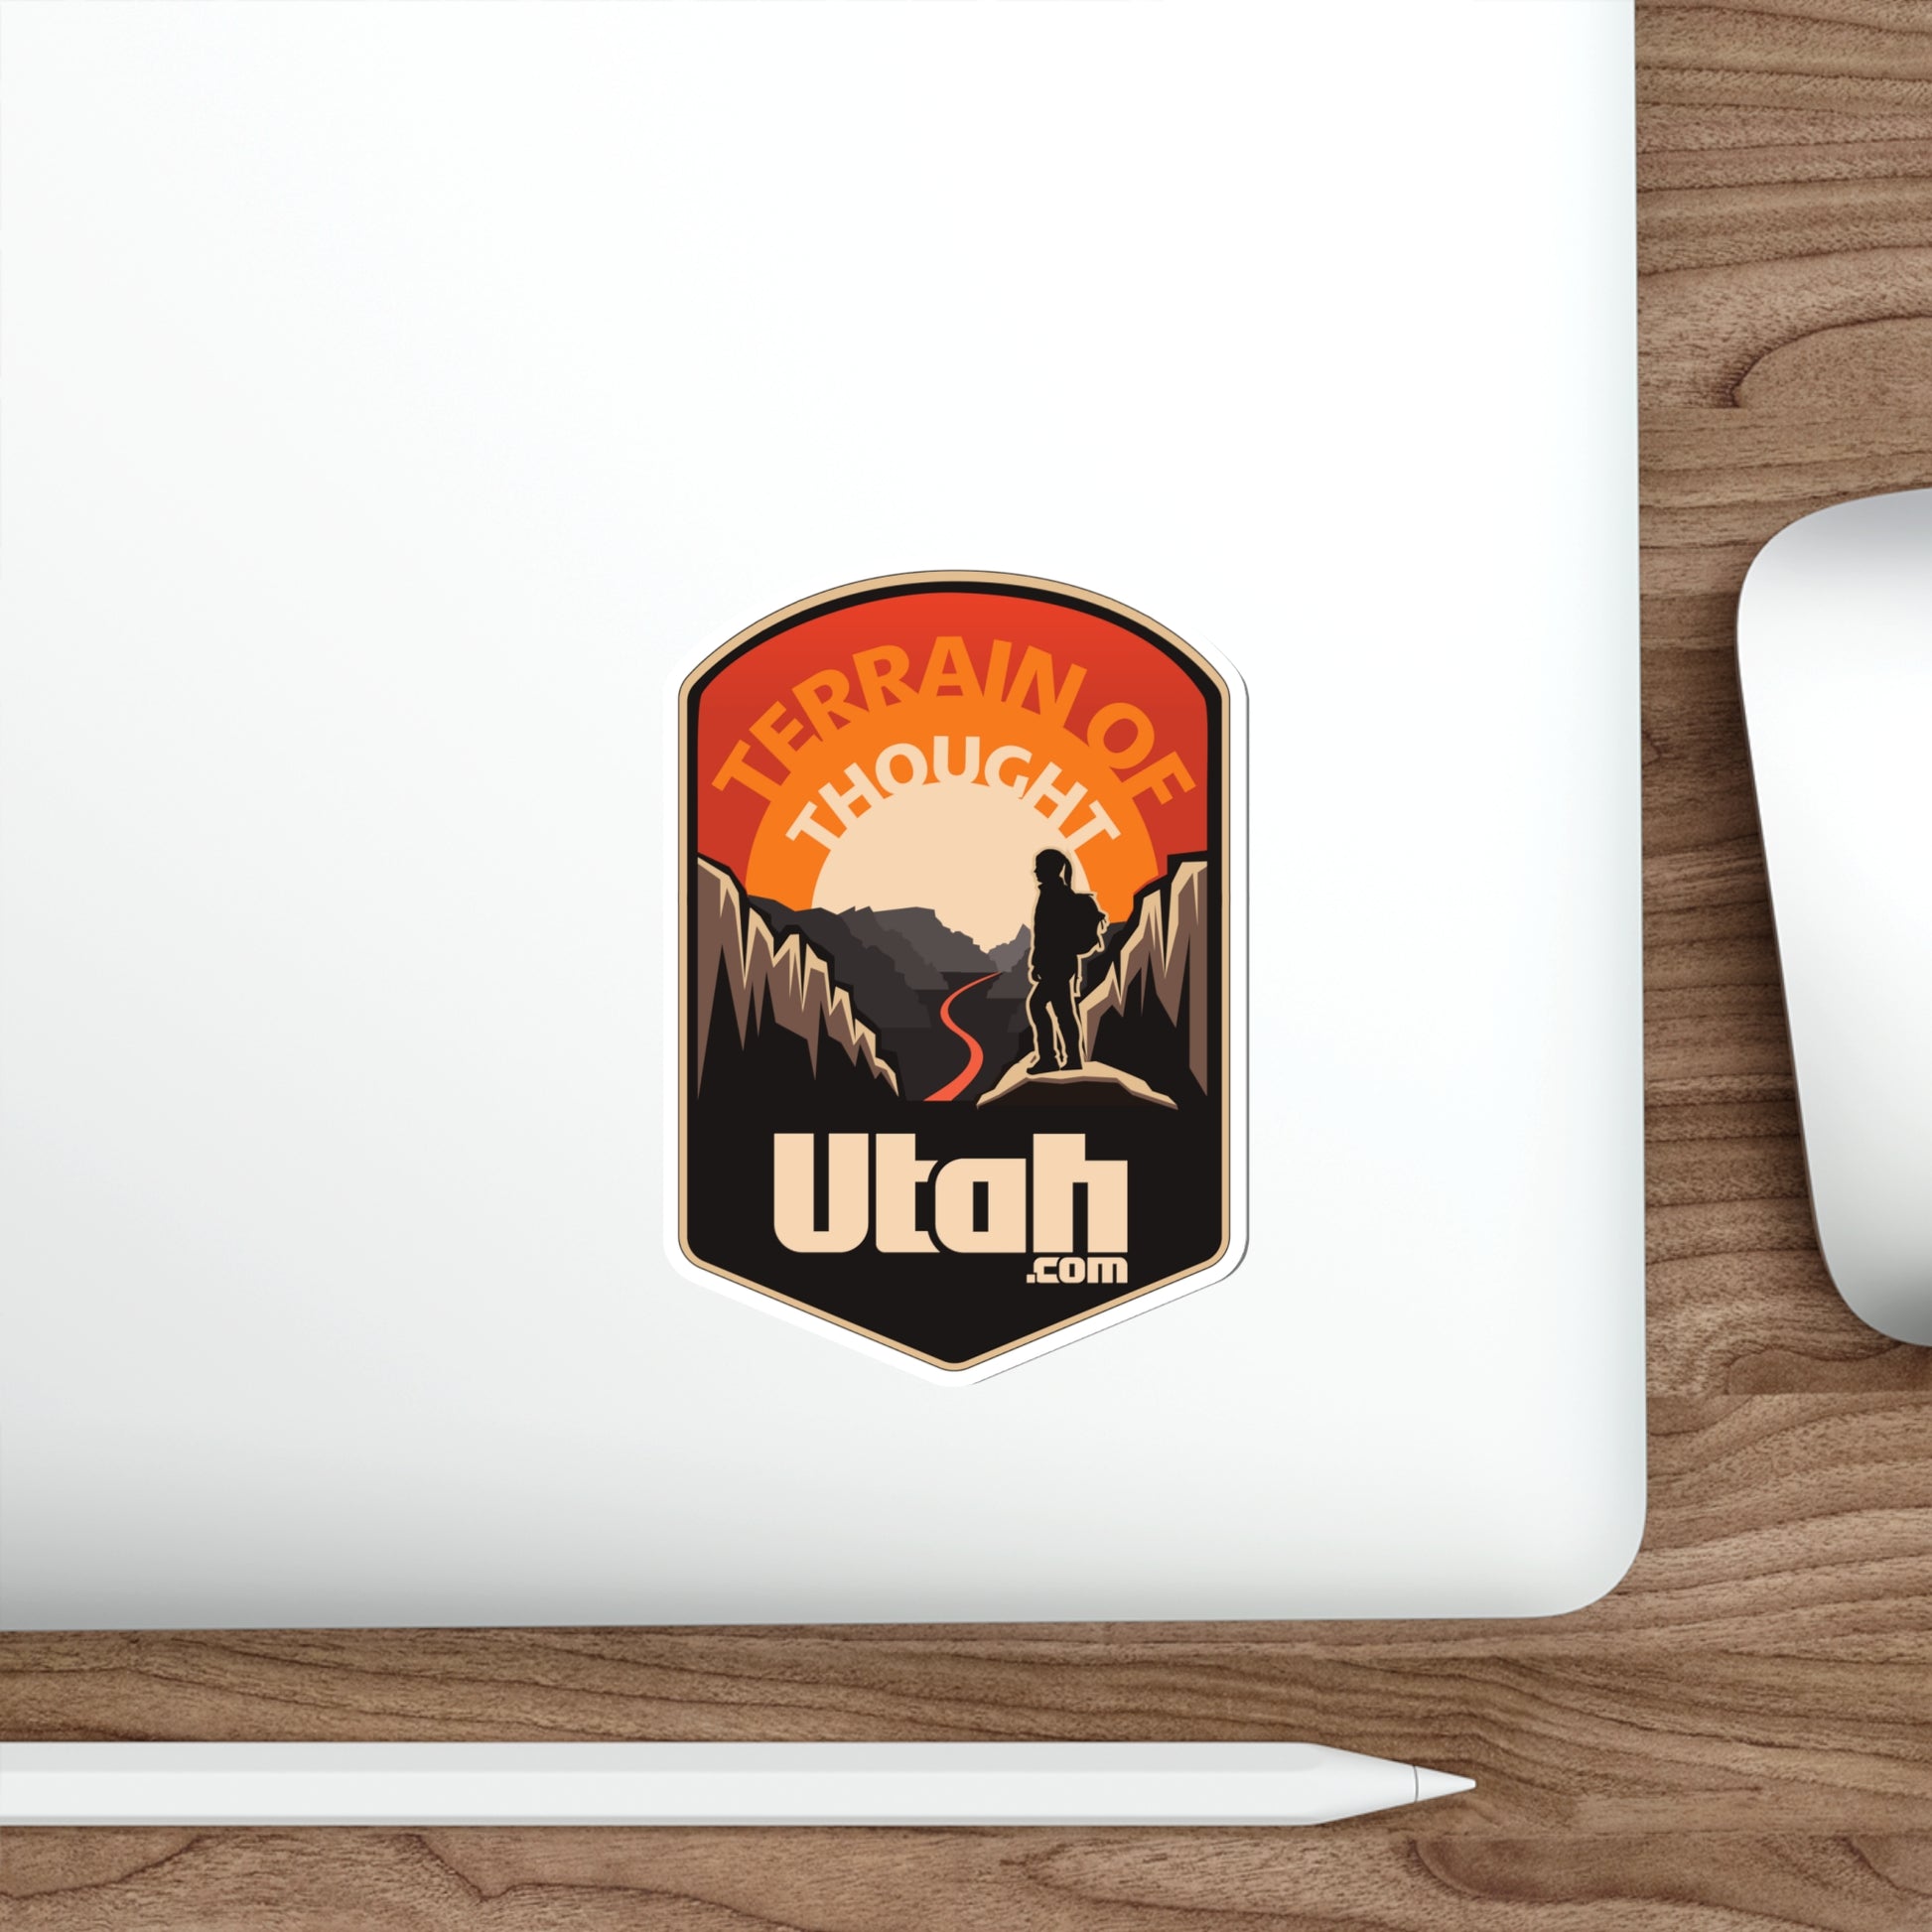 Embrace the adventurer in you with our premium hiking sticker! Designed for outdoor enthusiasts, this durable, weather-resistant sticker is perfect for adding a touch of wilderness to your gear. Whether you're scaling mountains or trekking through forests, our sticker is a symbol of your passion for exploration and the great outdoors. Easy to apply and made to last, it's the ideal companion for your next hiking adventure. Celebrate your love for hiking with this unique, eye-catching decal!